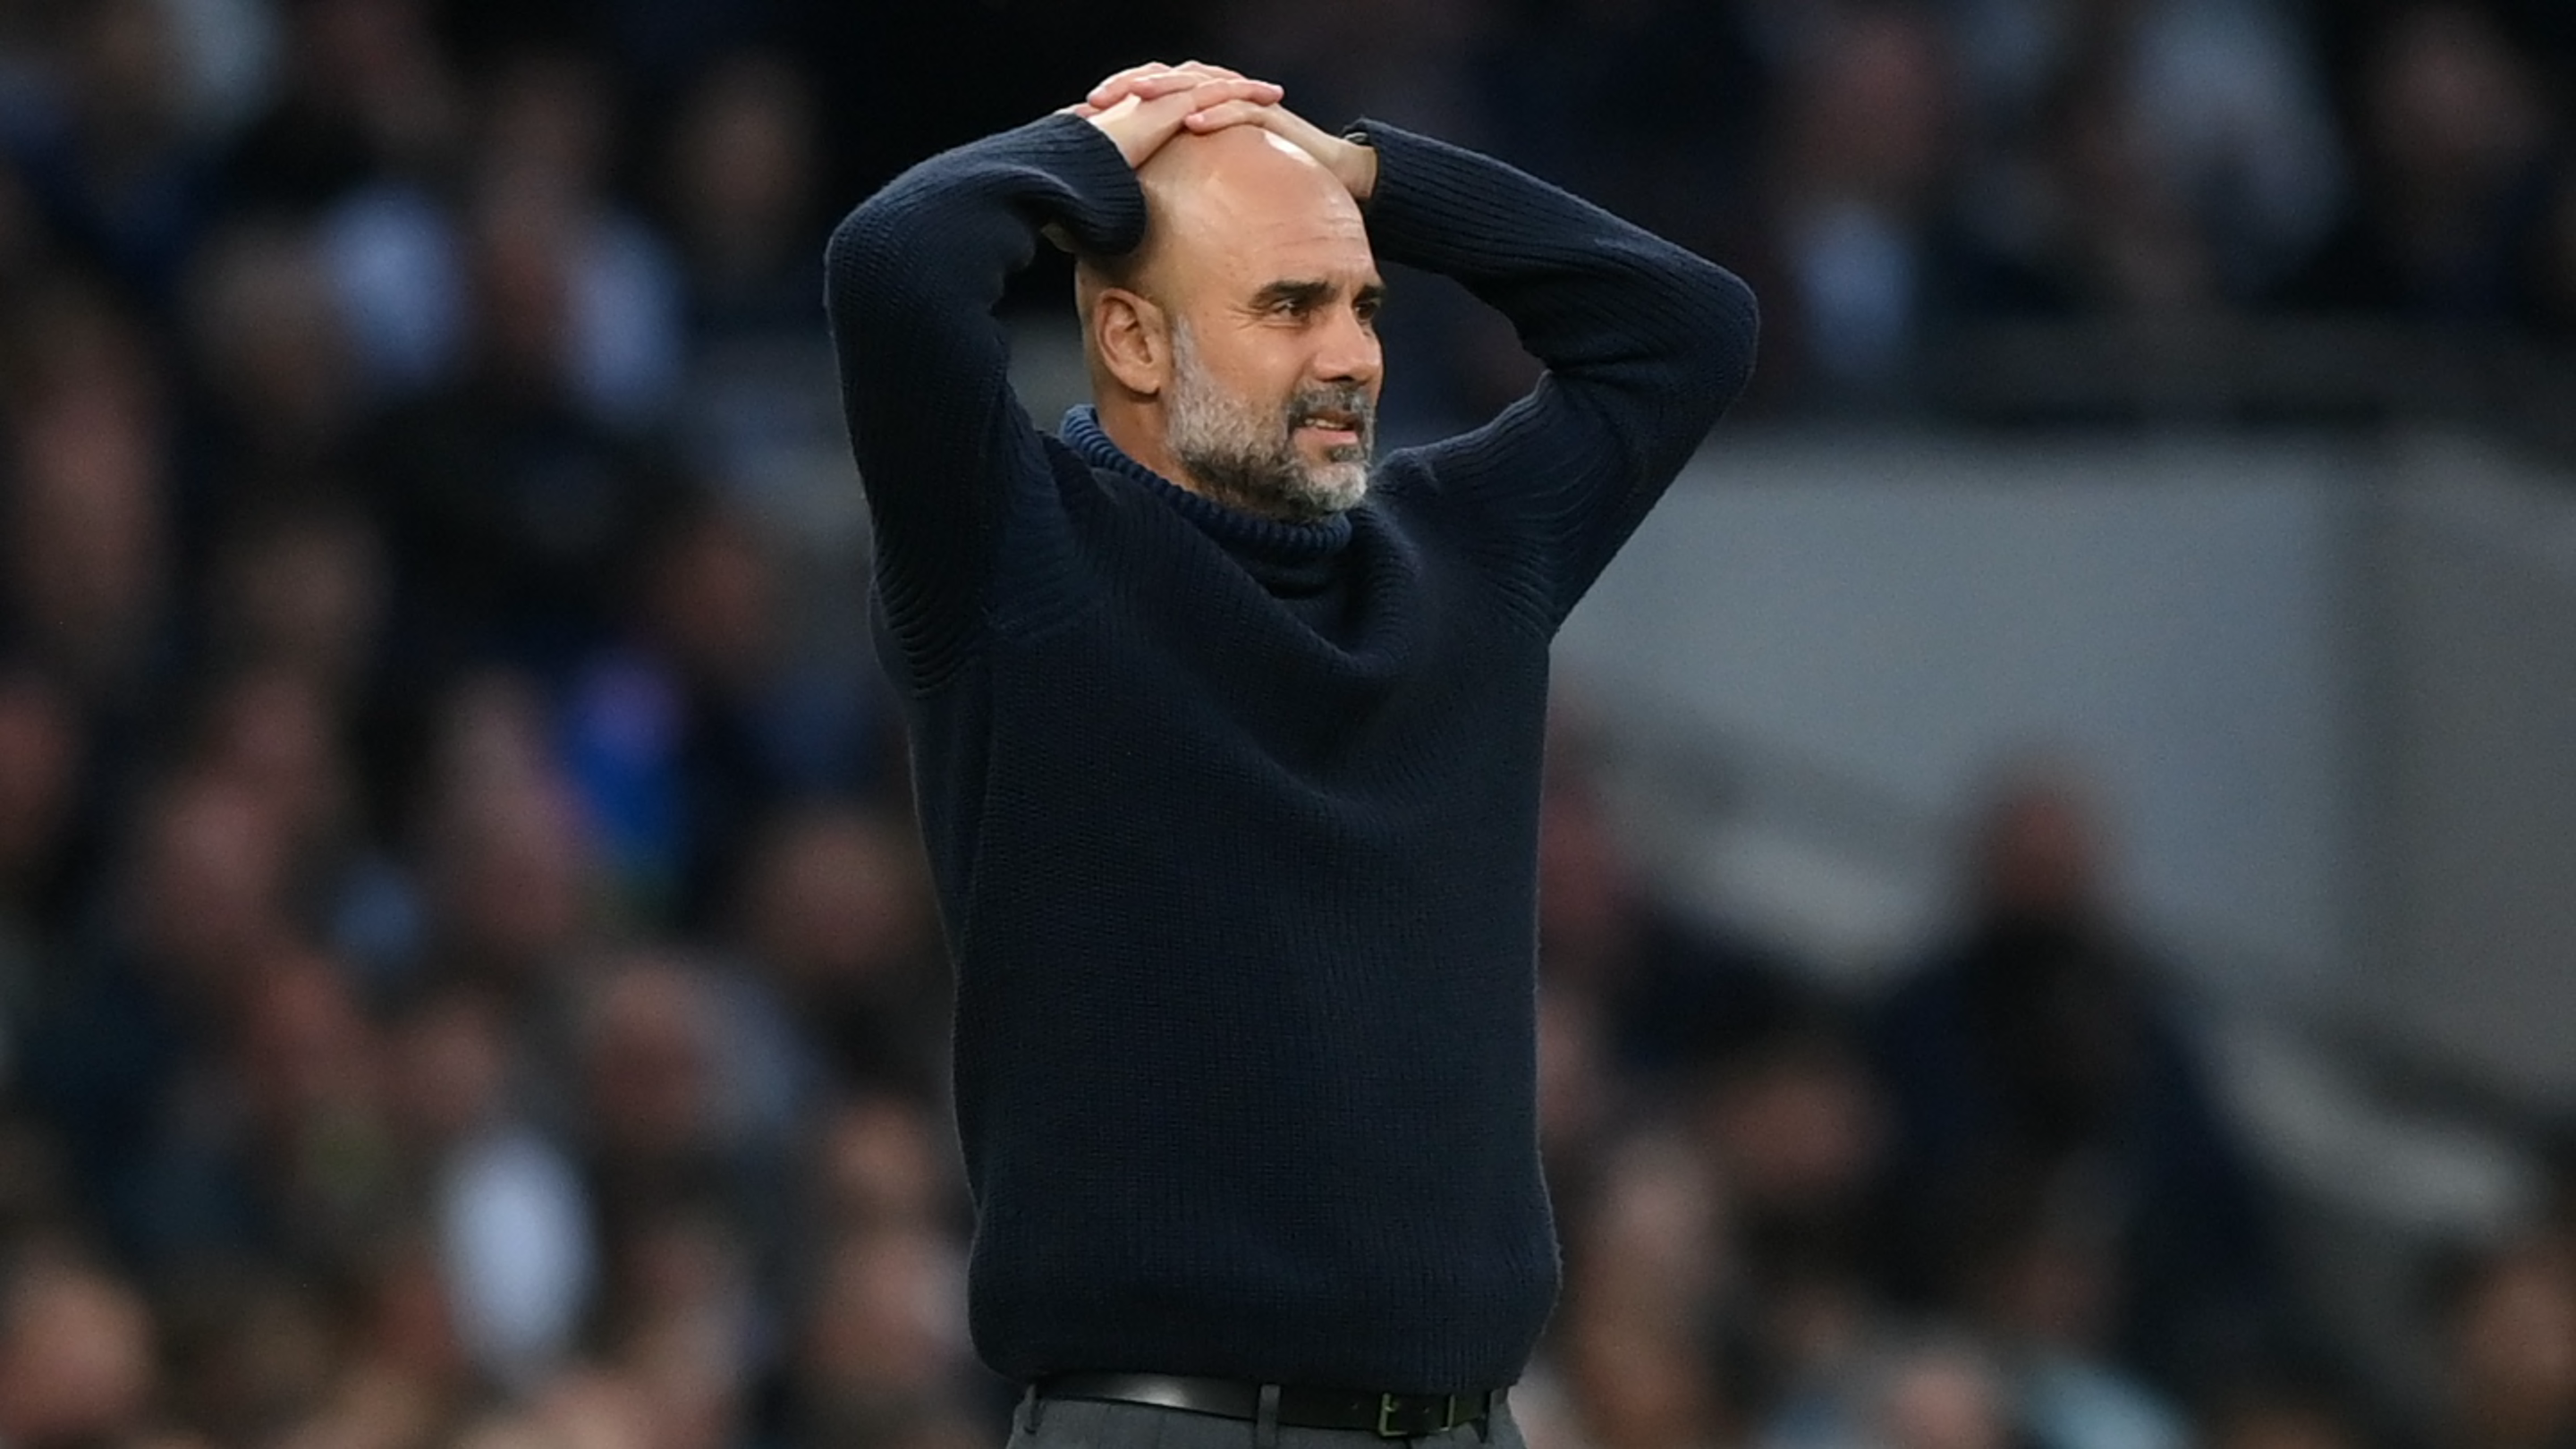 Pep Guardiola explains dramatic 'oh my god!' reaction to Son Heung-min miss